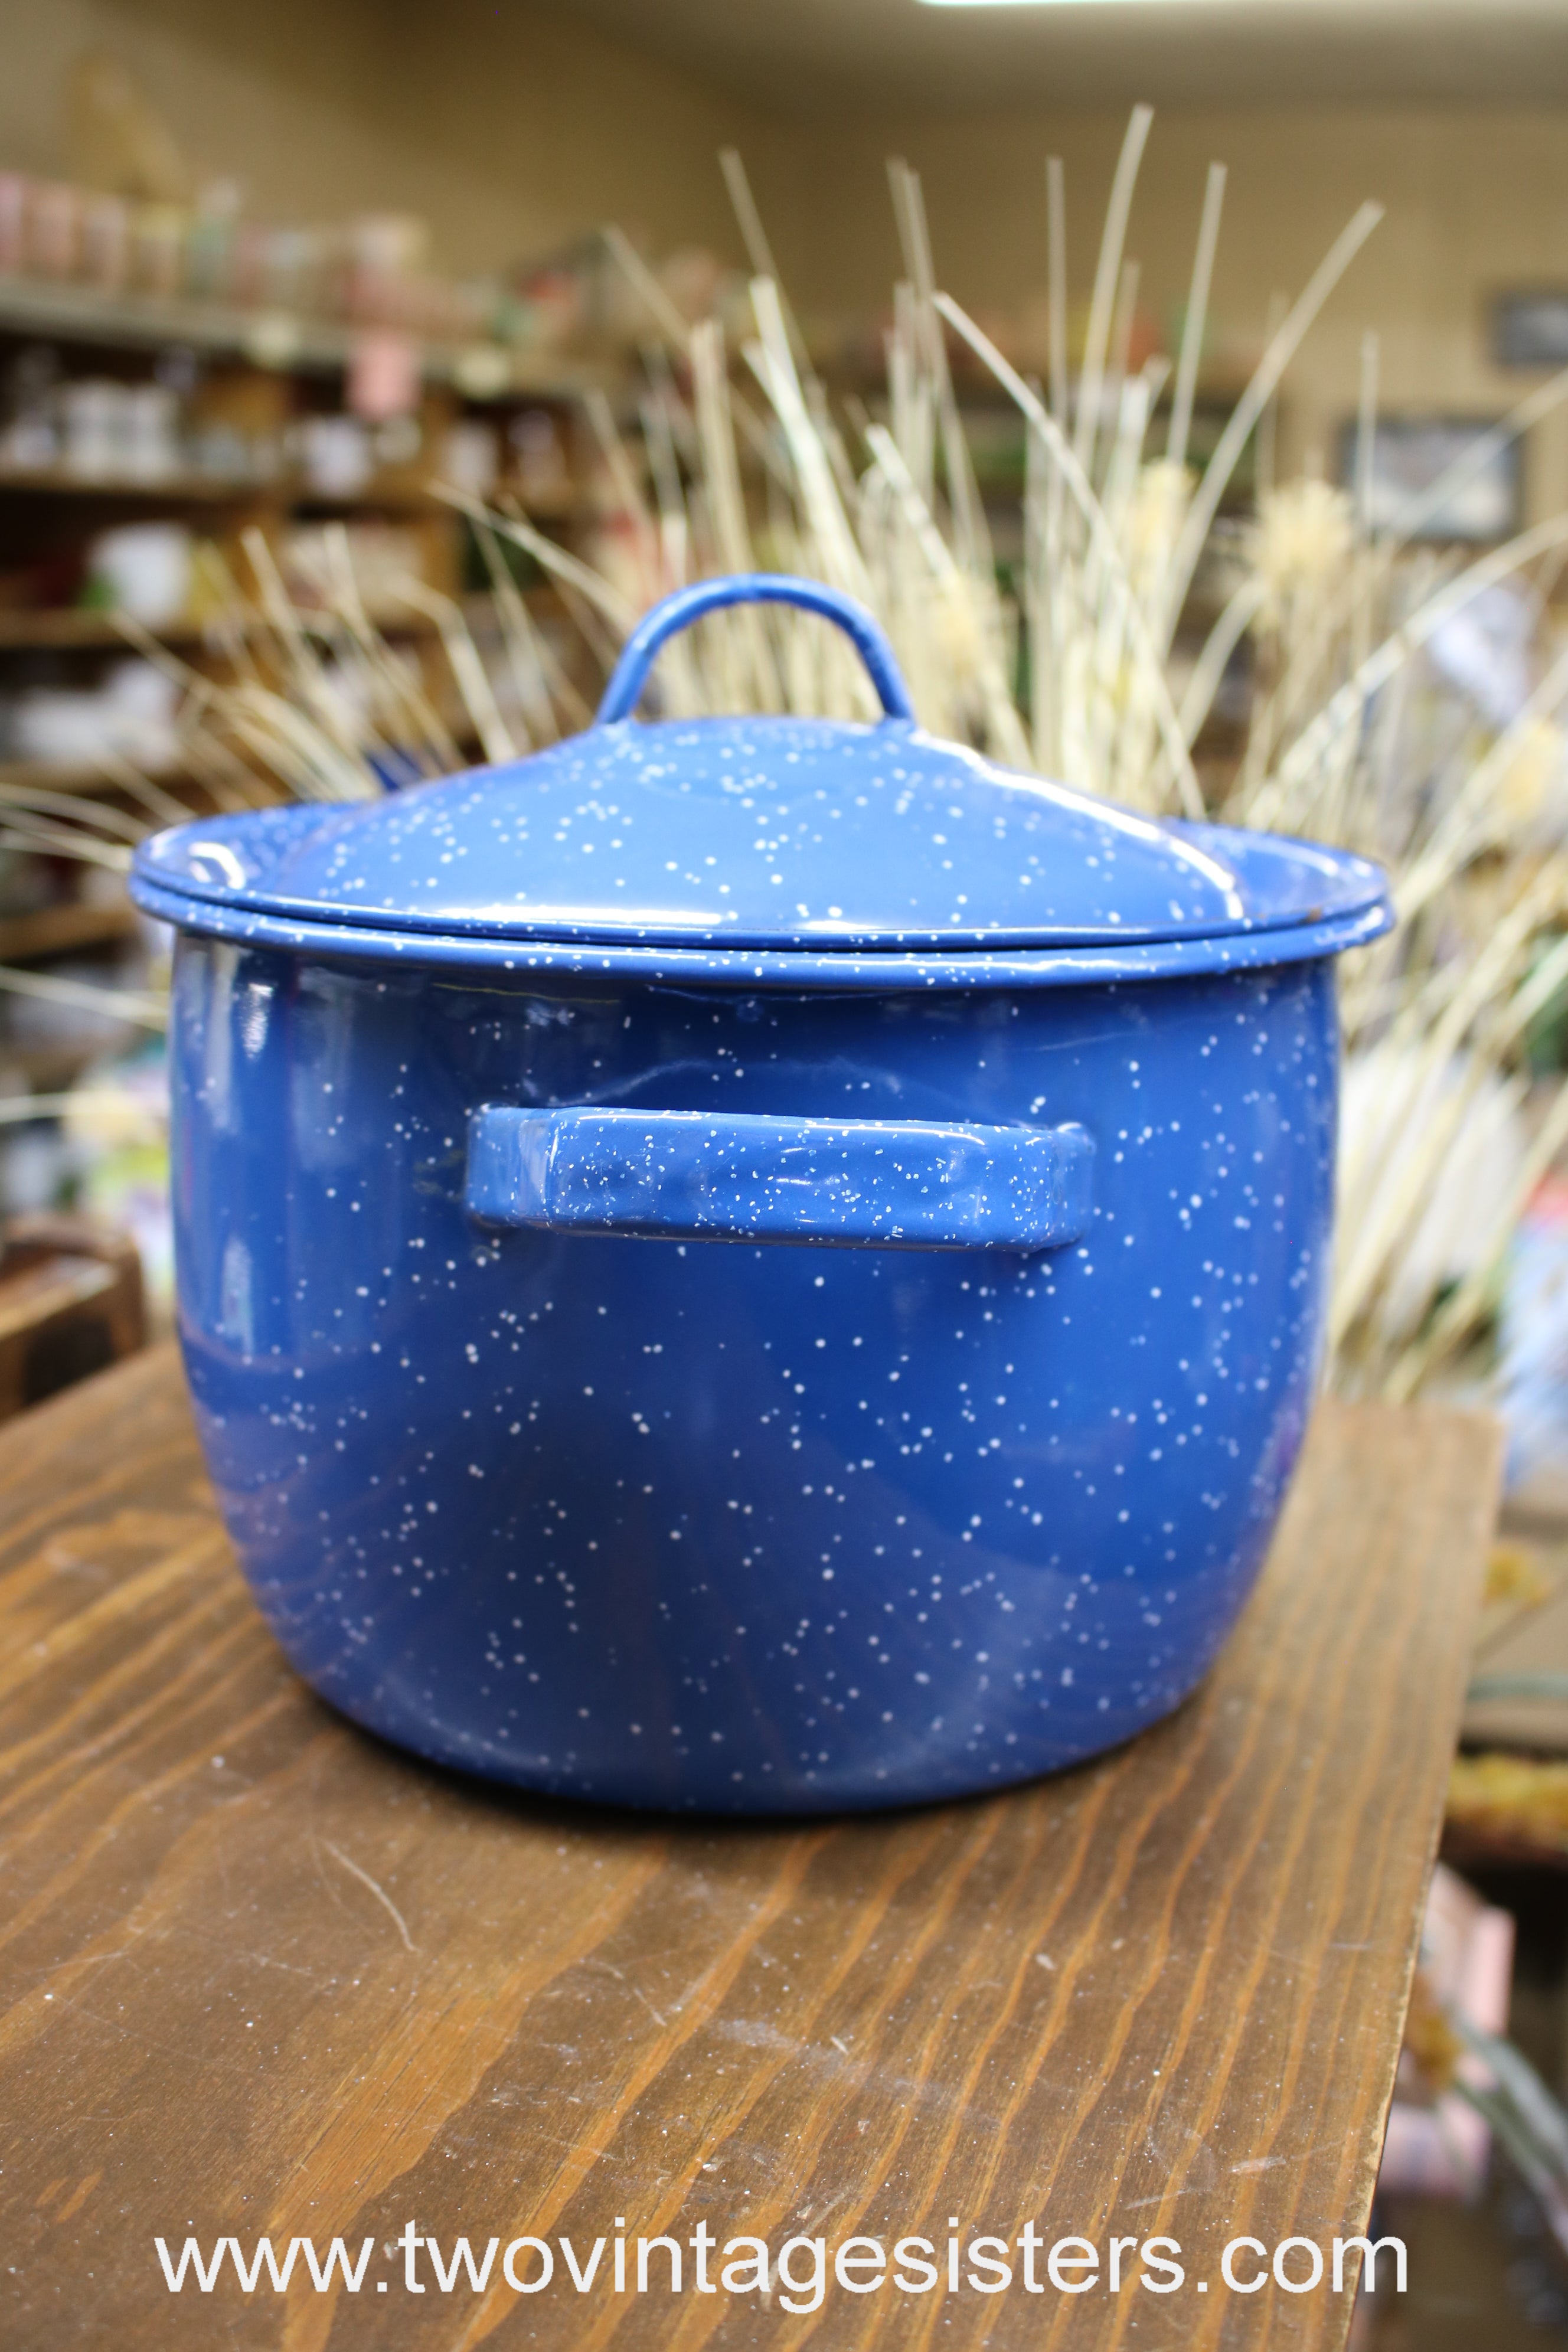 Lot of 3 Speckled Blue Enamel Camping Cookware Pots